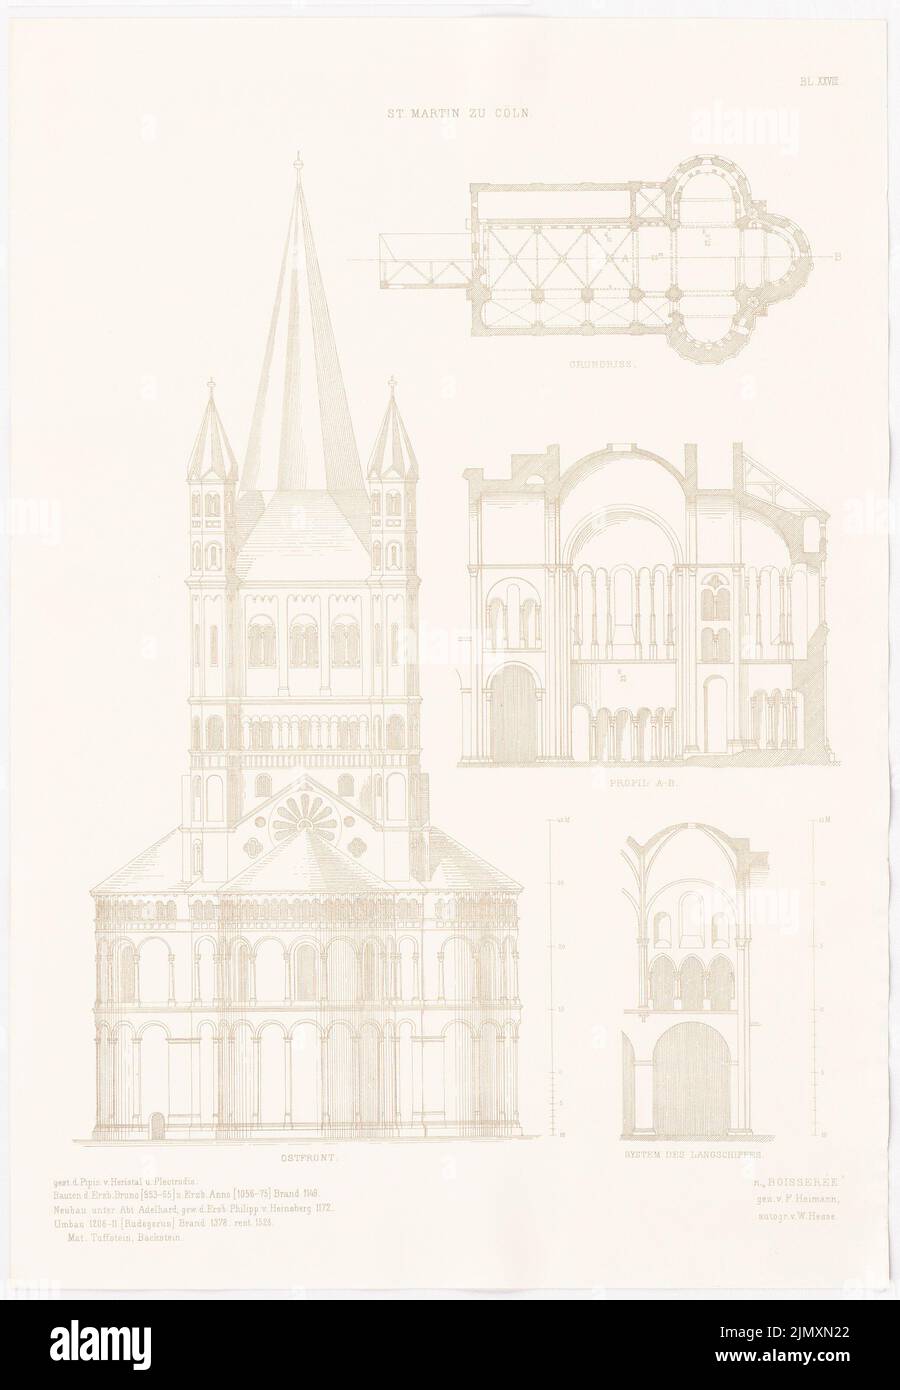 N.N., St. Martin in Cologne. (From: Altchristl. U. Roman. Building, ed. V. Character output d. Stud. TH Berlin, 1875) (1875-1875): View, floor plan, cross-section, detail. Pressure on paper, 52 x 36 cm (including scan edges) Stock Photo